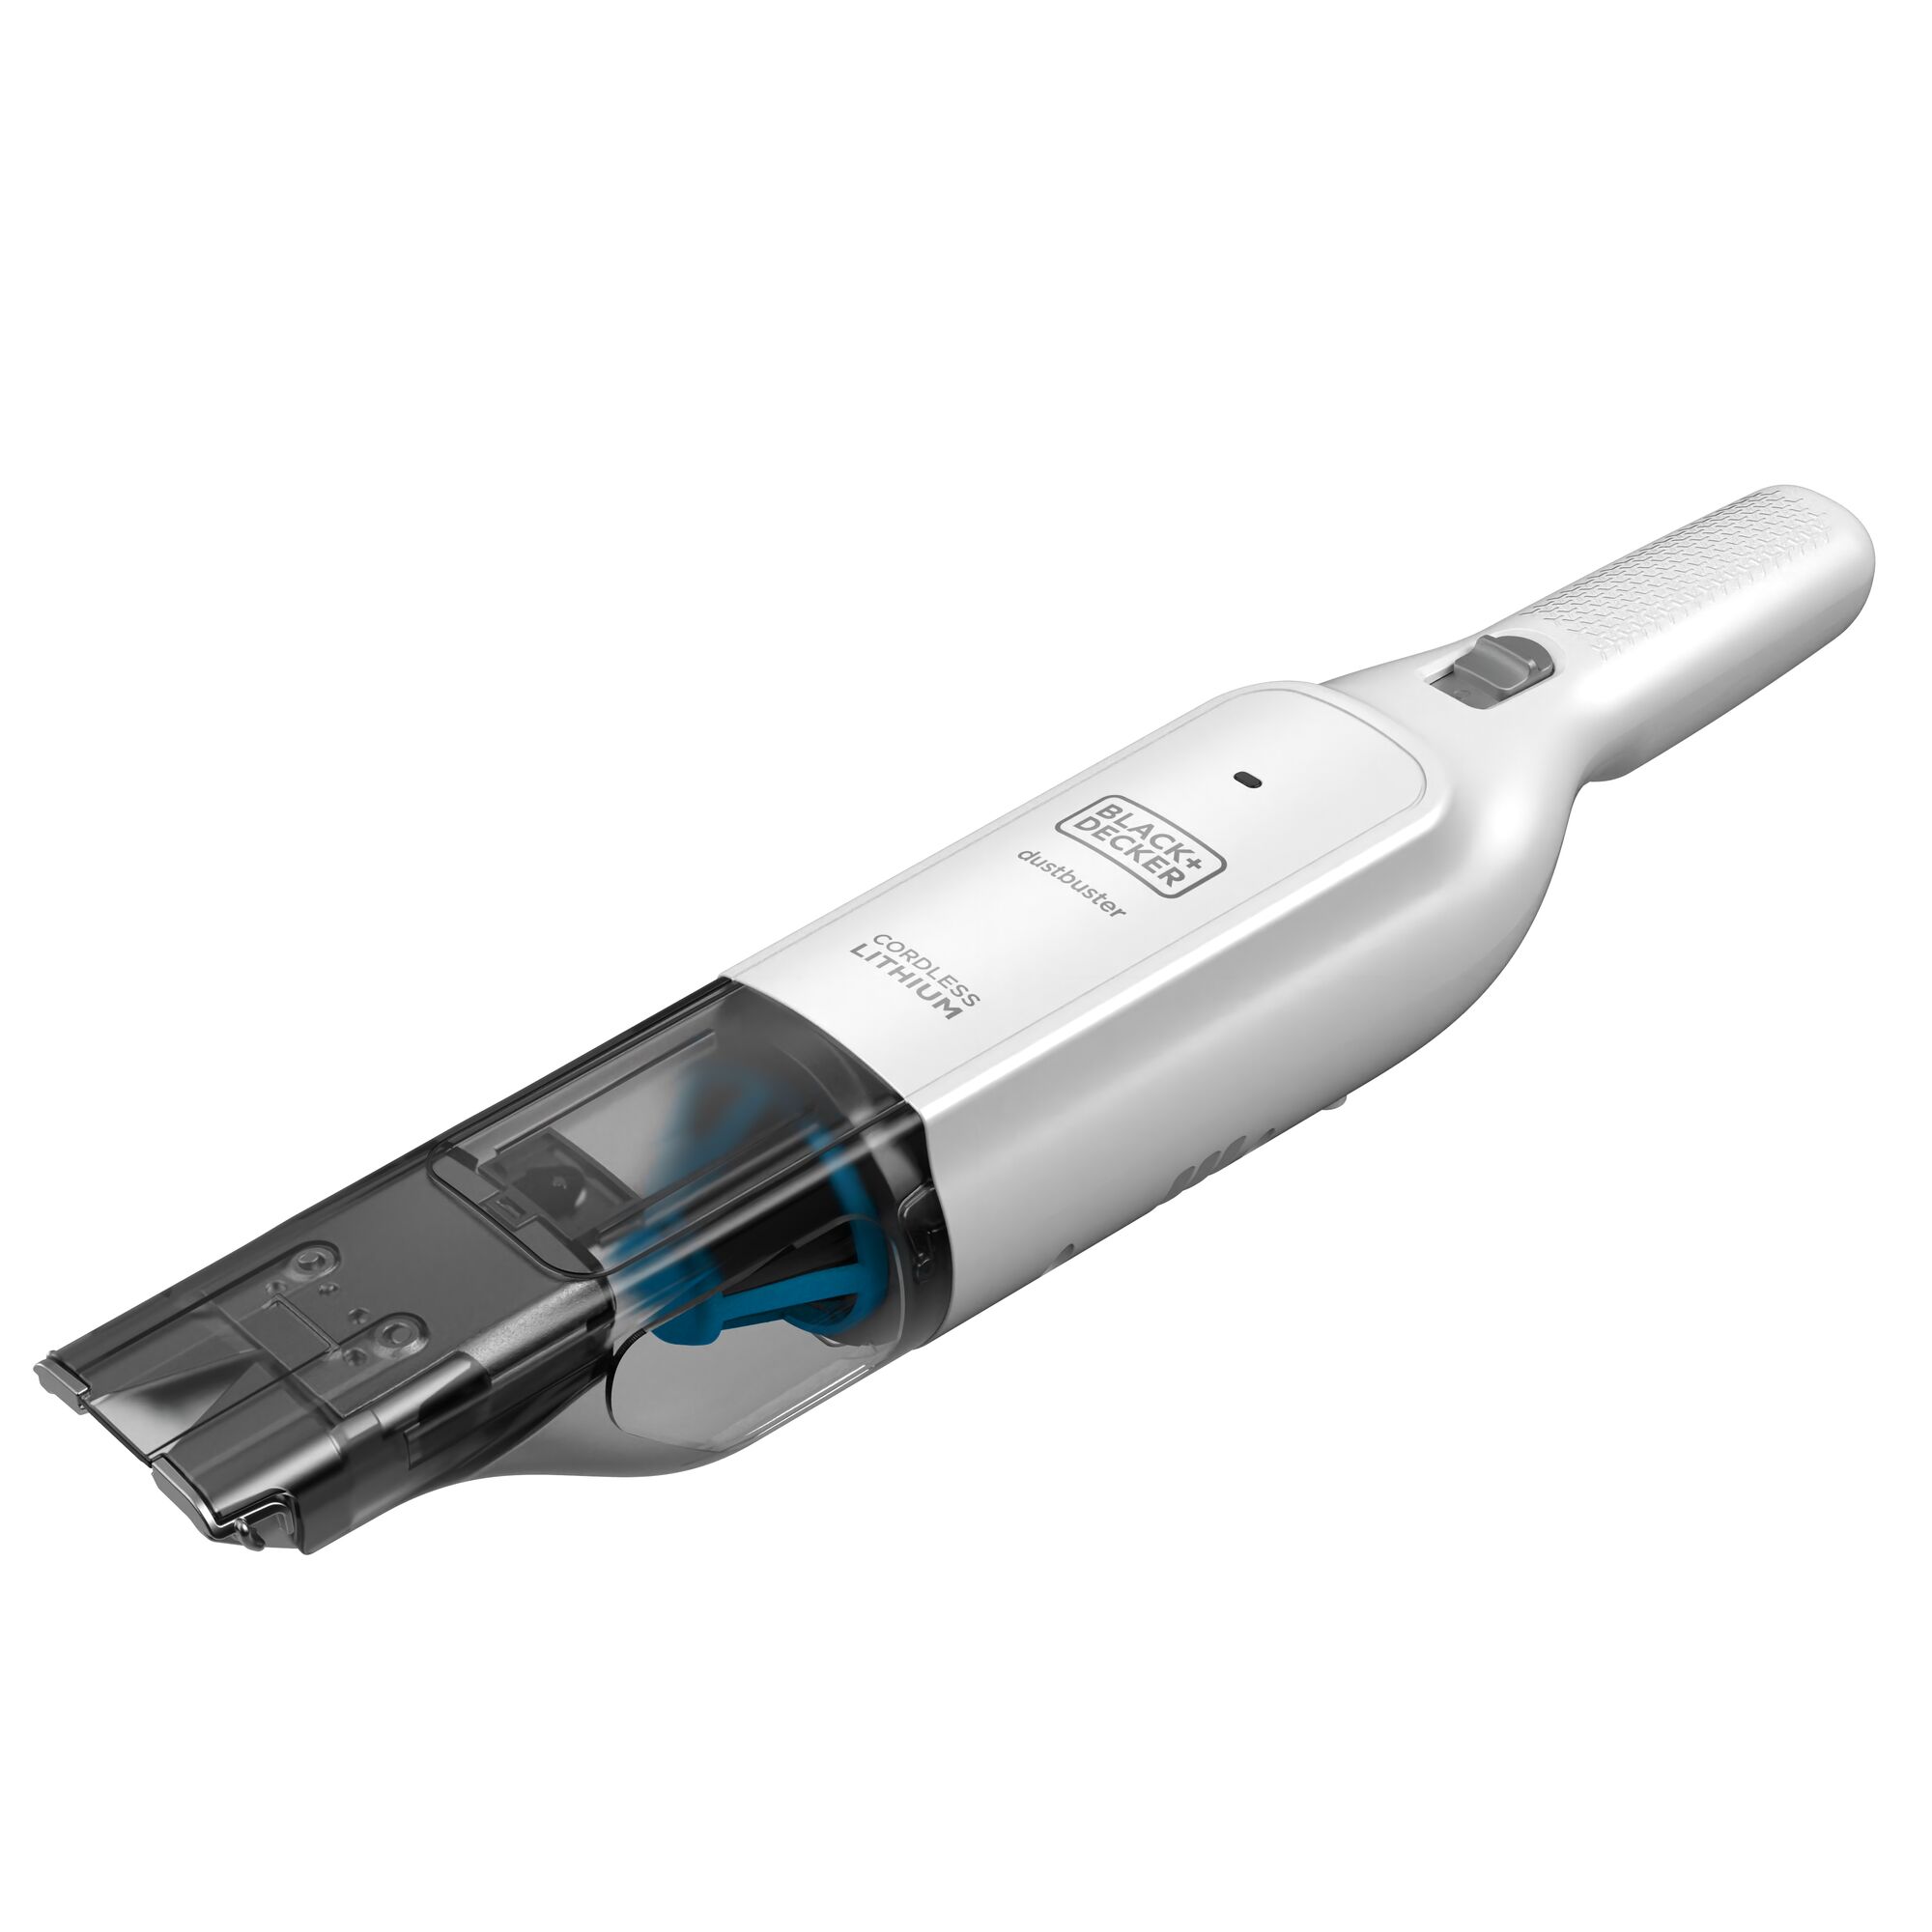 Profile of Dustbuster advanced clean cordless hand vacuum.\n